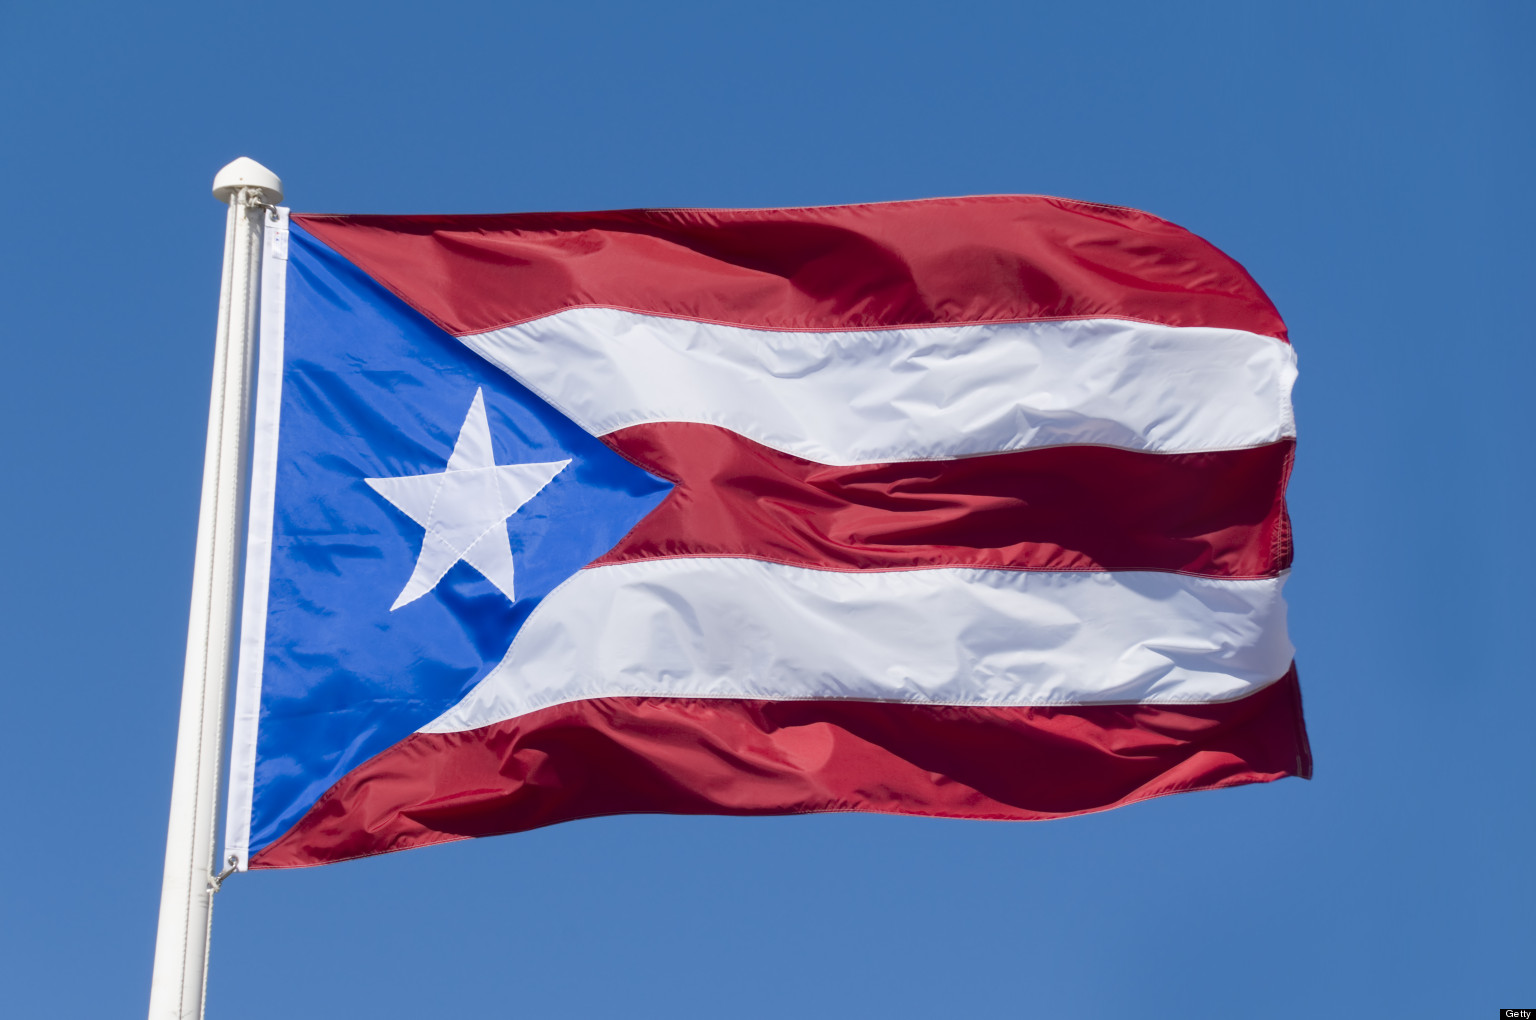 Free Download Boricua Flag Tattoo Pictures To Pin 1536x1020 For